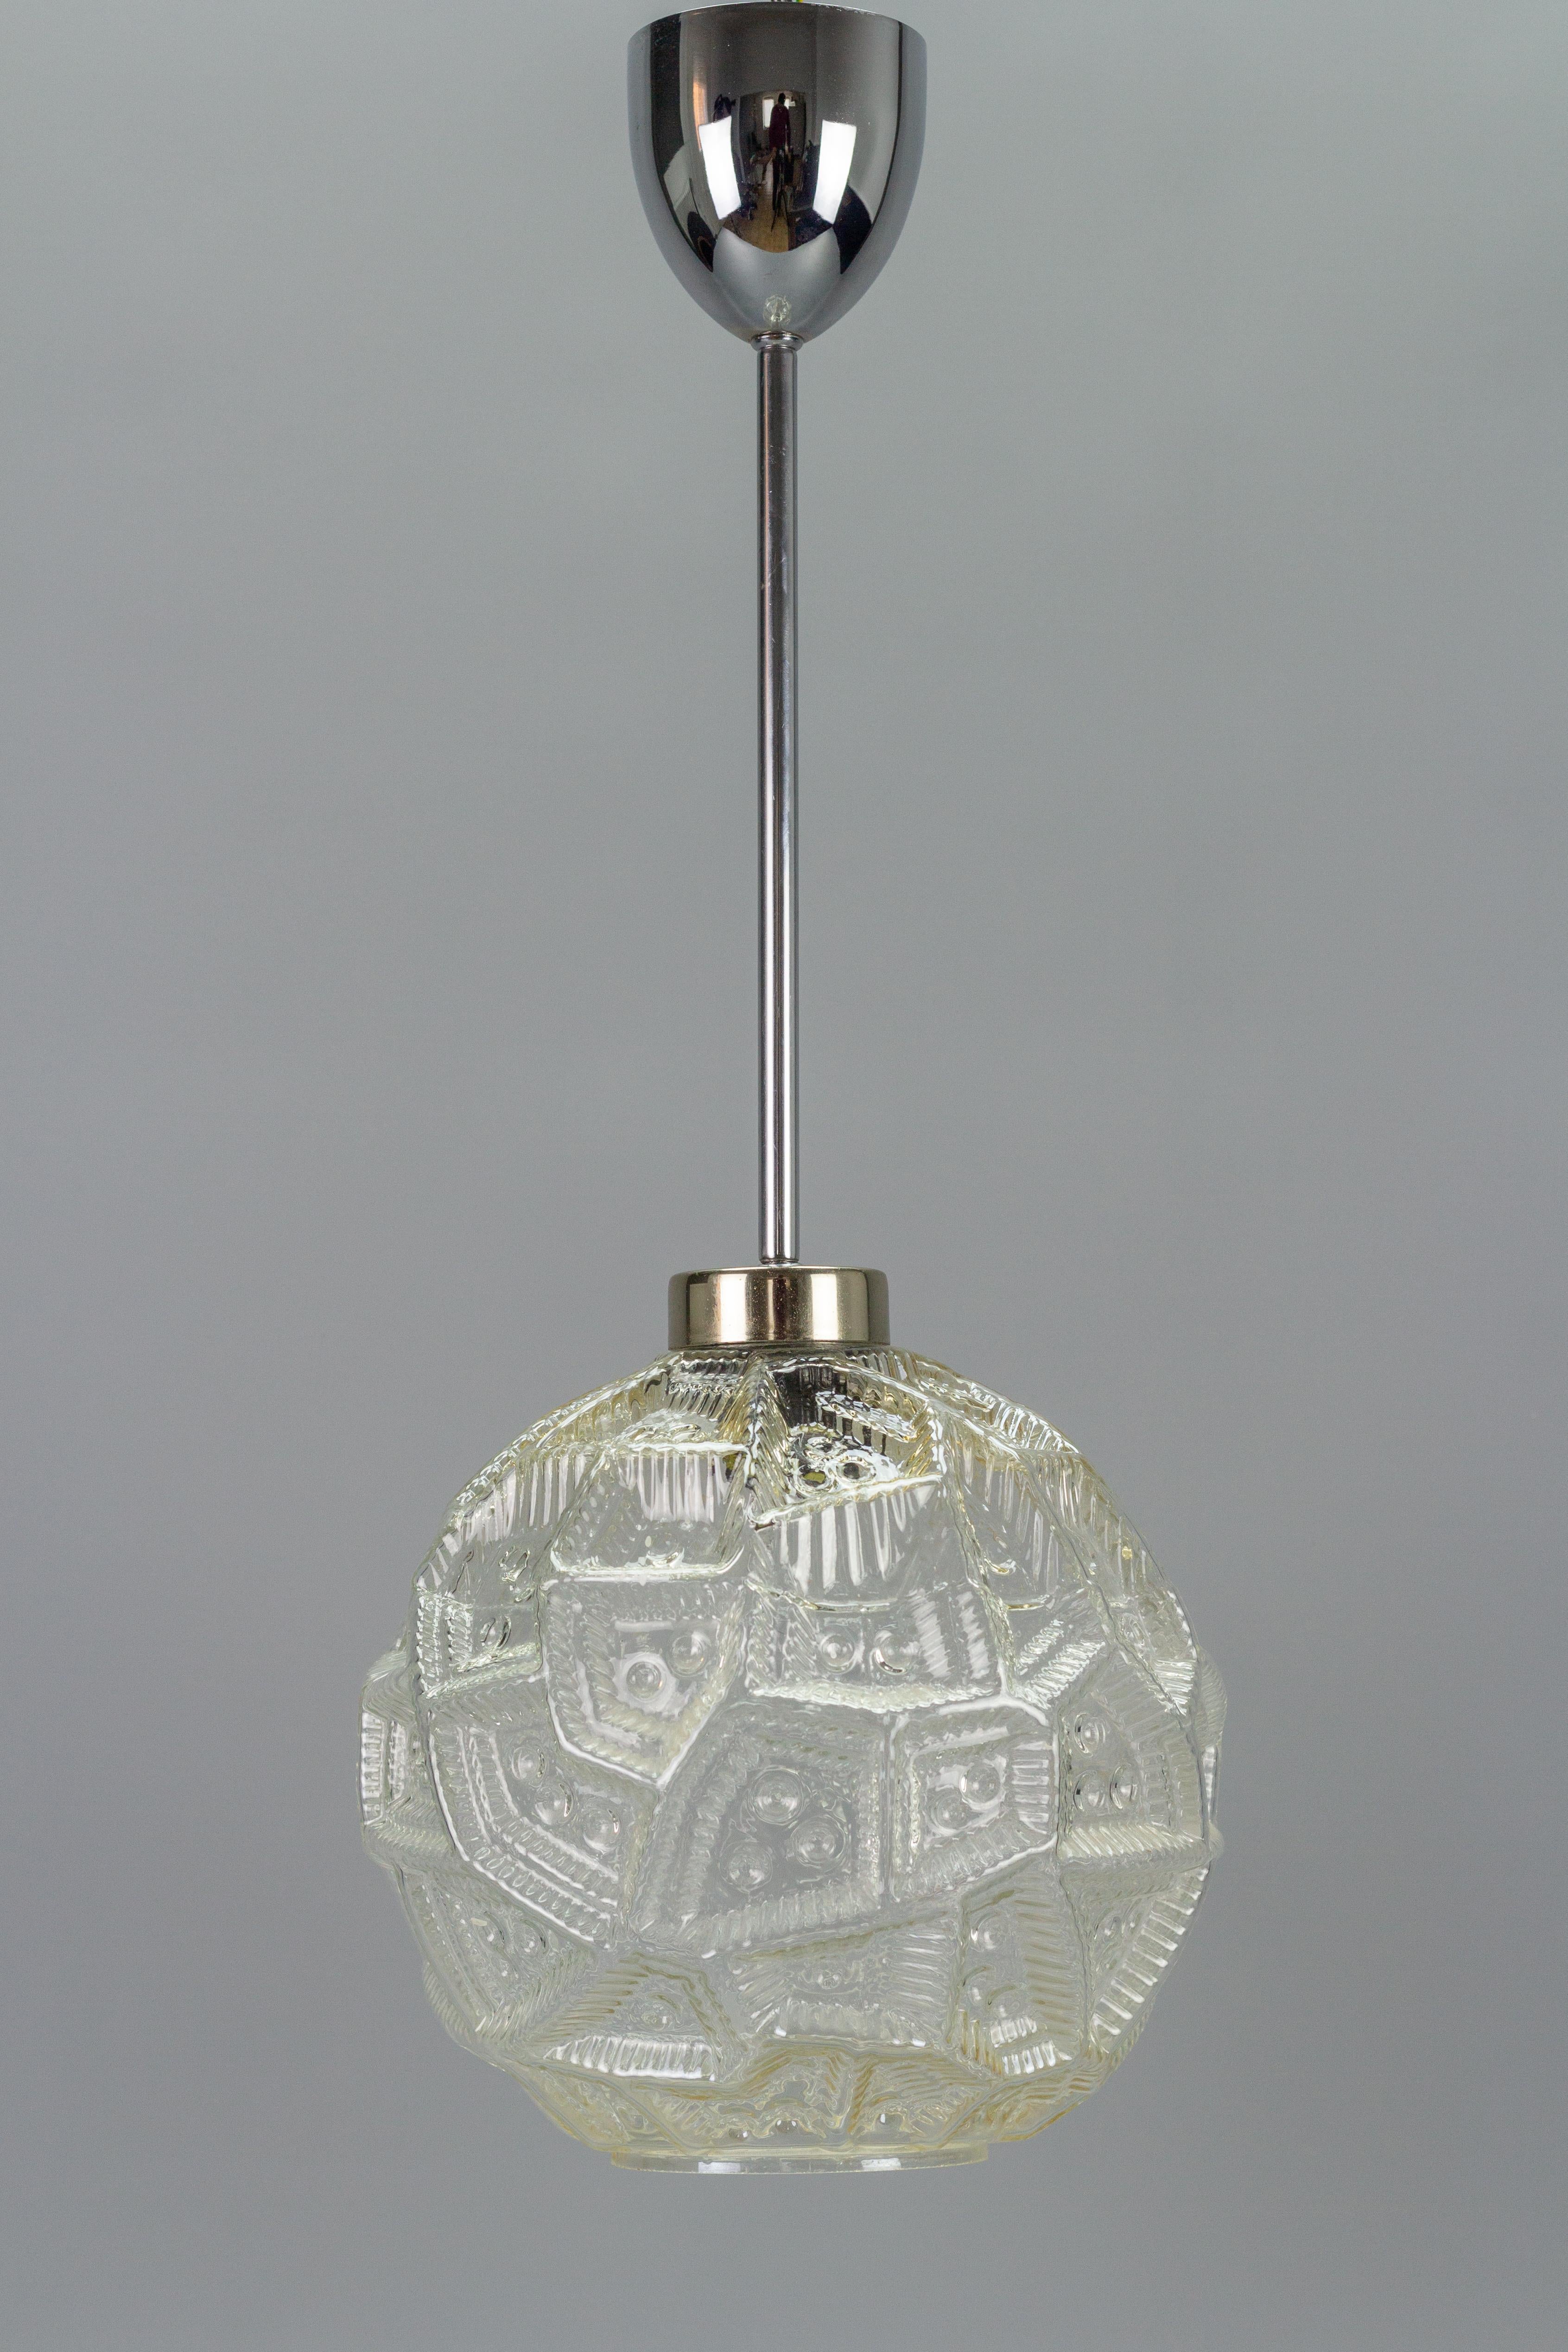 Mid-Century Modern pendant light with clear glass globe lampshade and chrome fitting. Germany, 1970s. Light reflects and refracts beautifully from the unusual texture of the glass globe surface, creating plays of light and shadow on to nearby walls